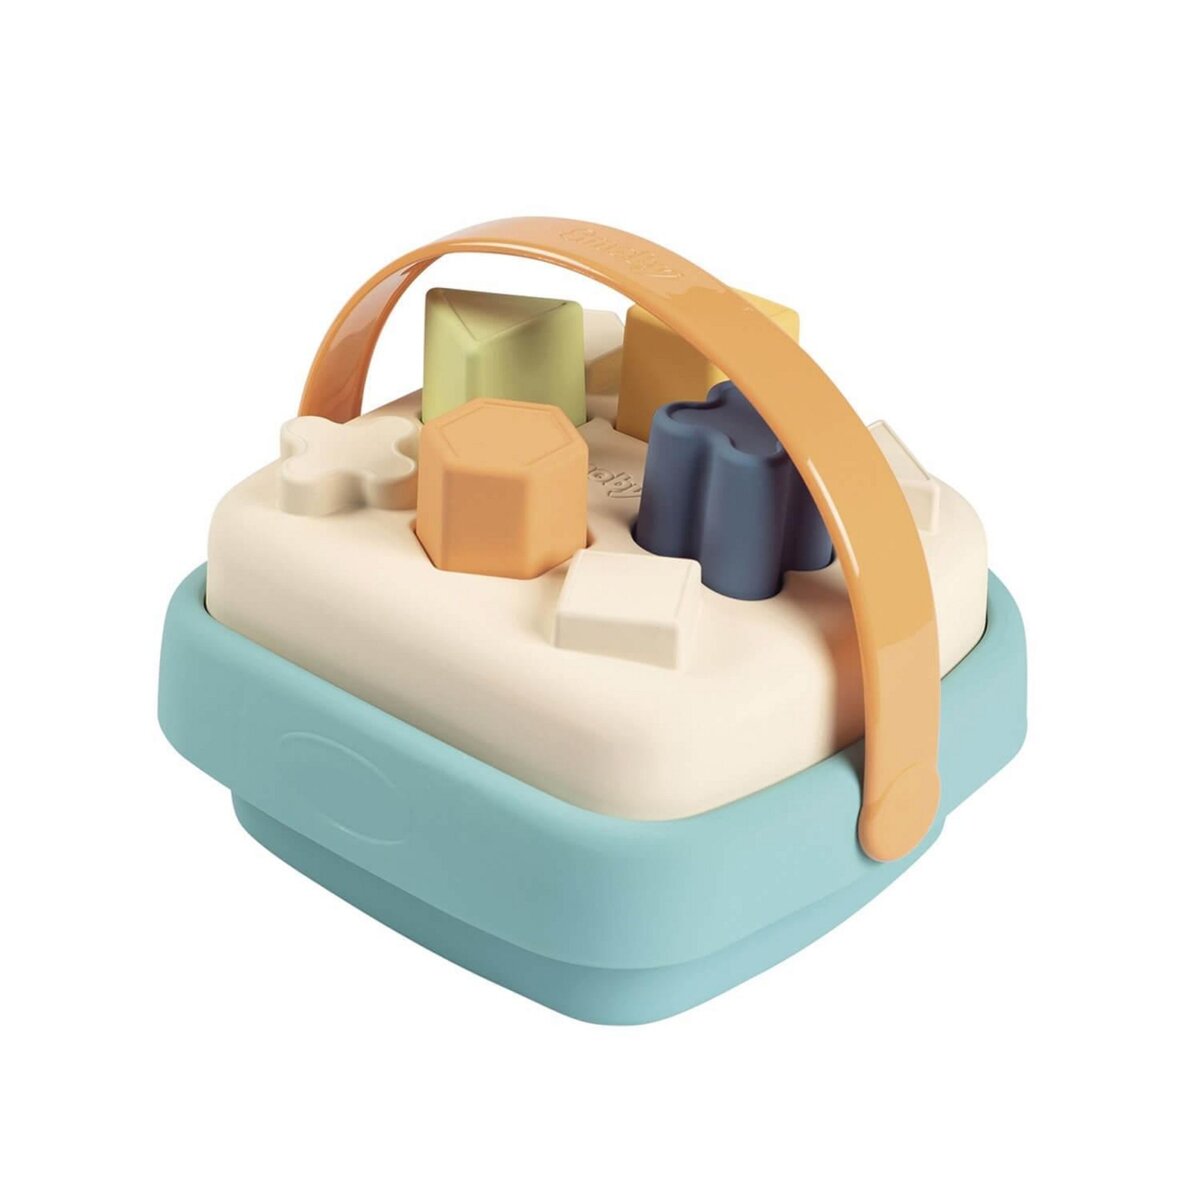 SMOBY Panier Des Formes - Little Smoby pas cher 